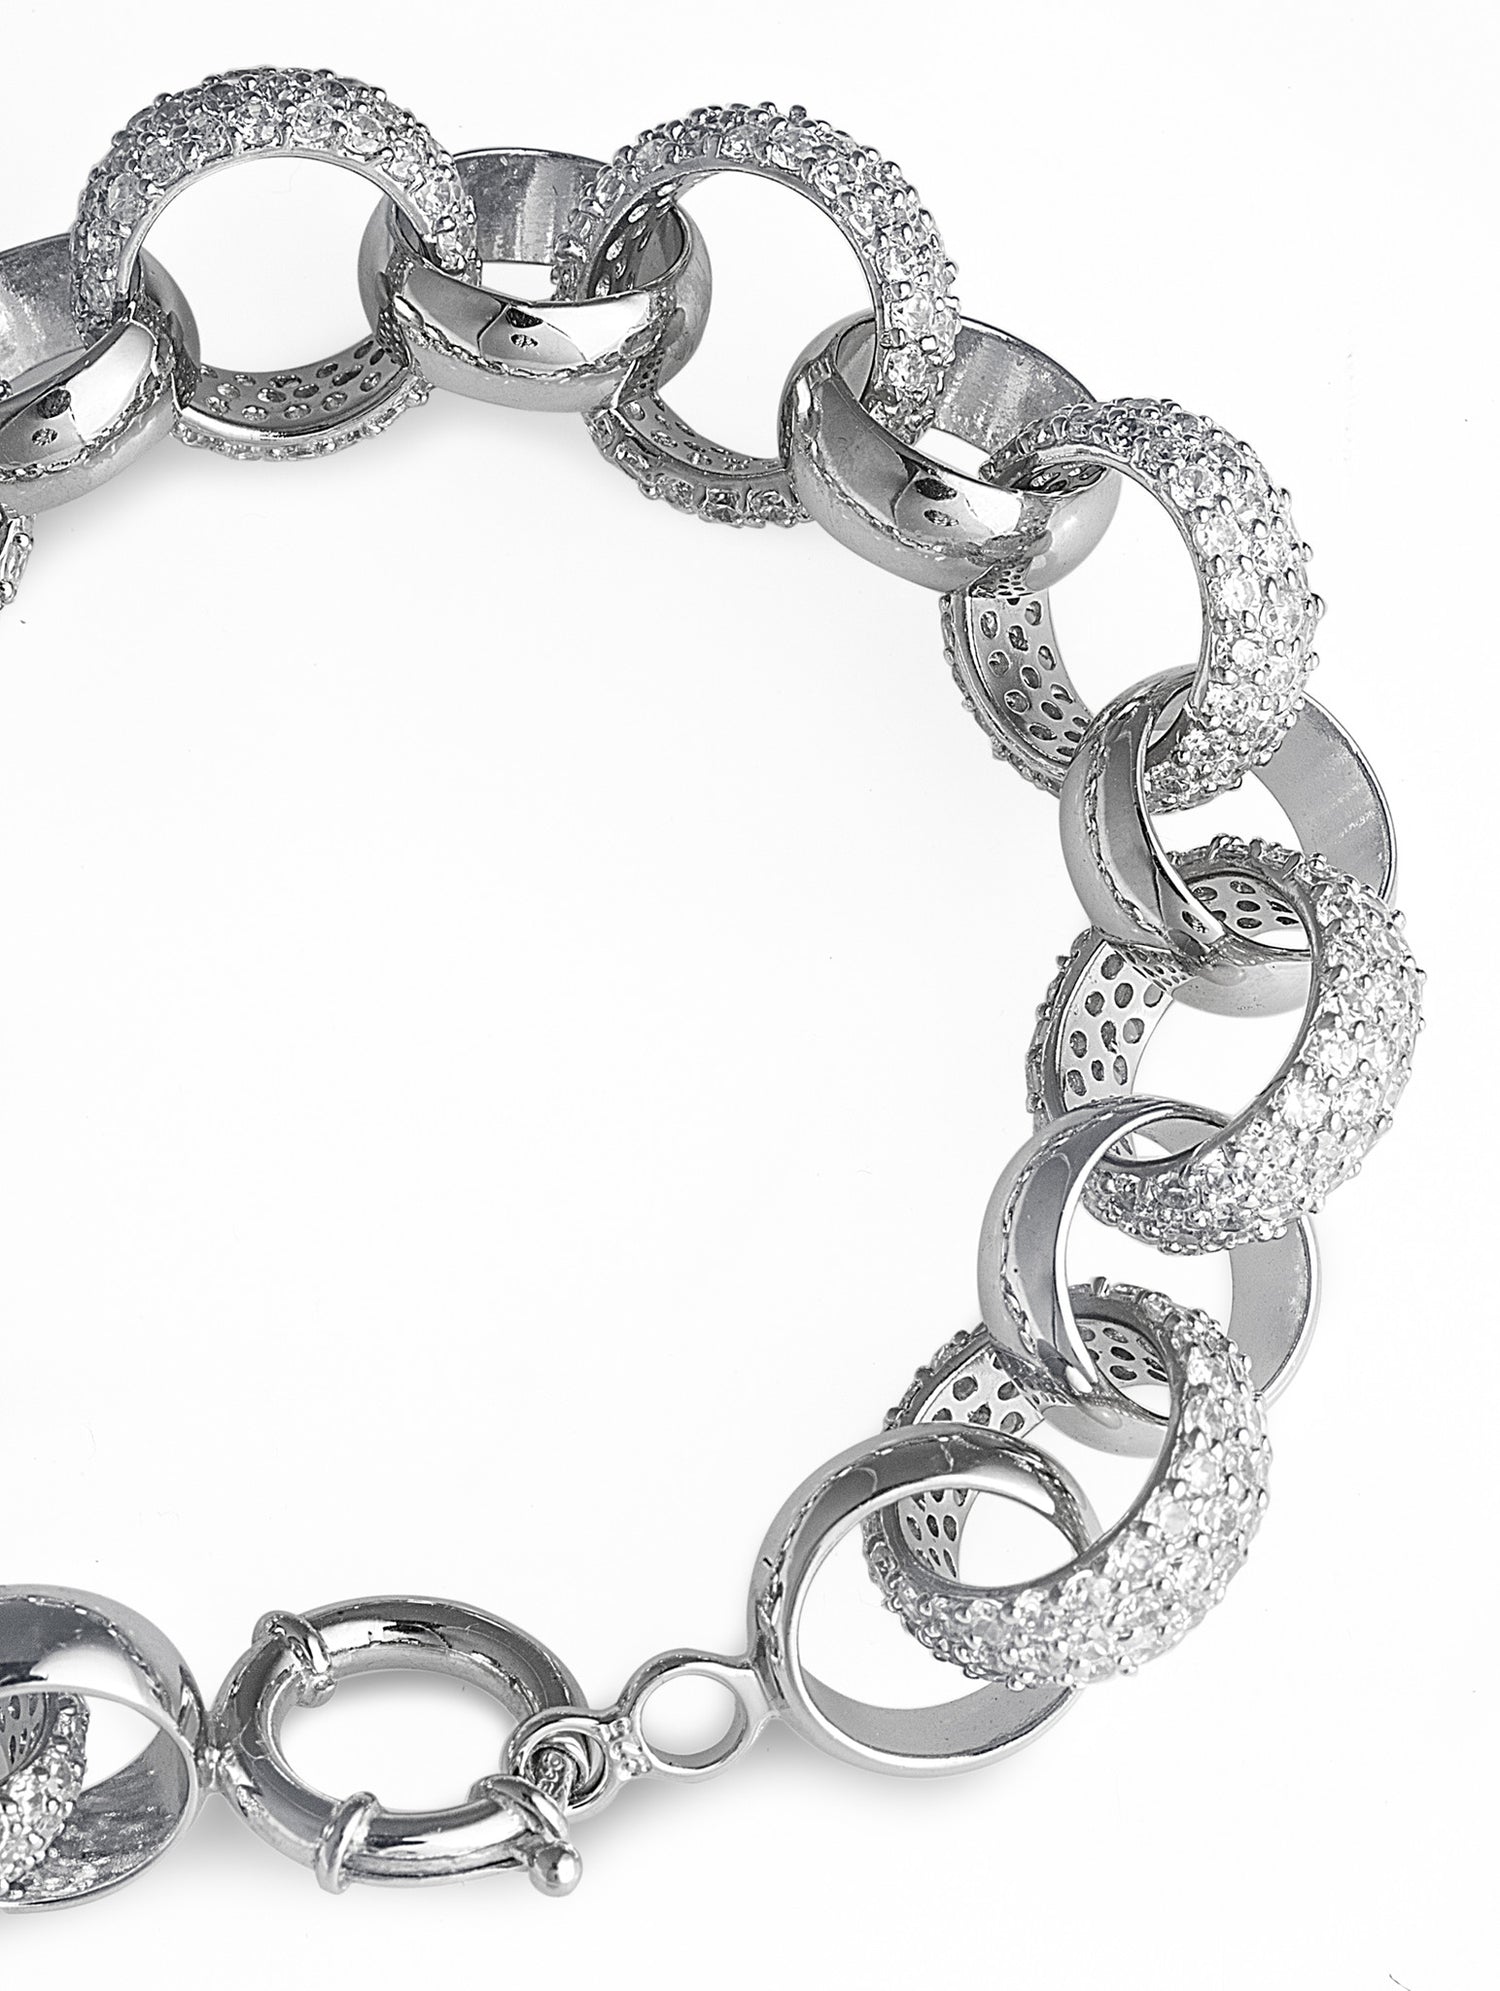 Bachi Bling Bracelet, a chunky 925 sterling silver belcher bracelet encrusted with pave set cubic zirconia stones. Worldwide shipping from Melbourne Australia.